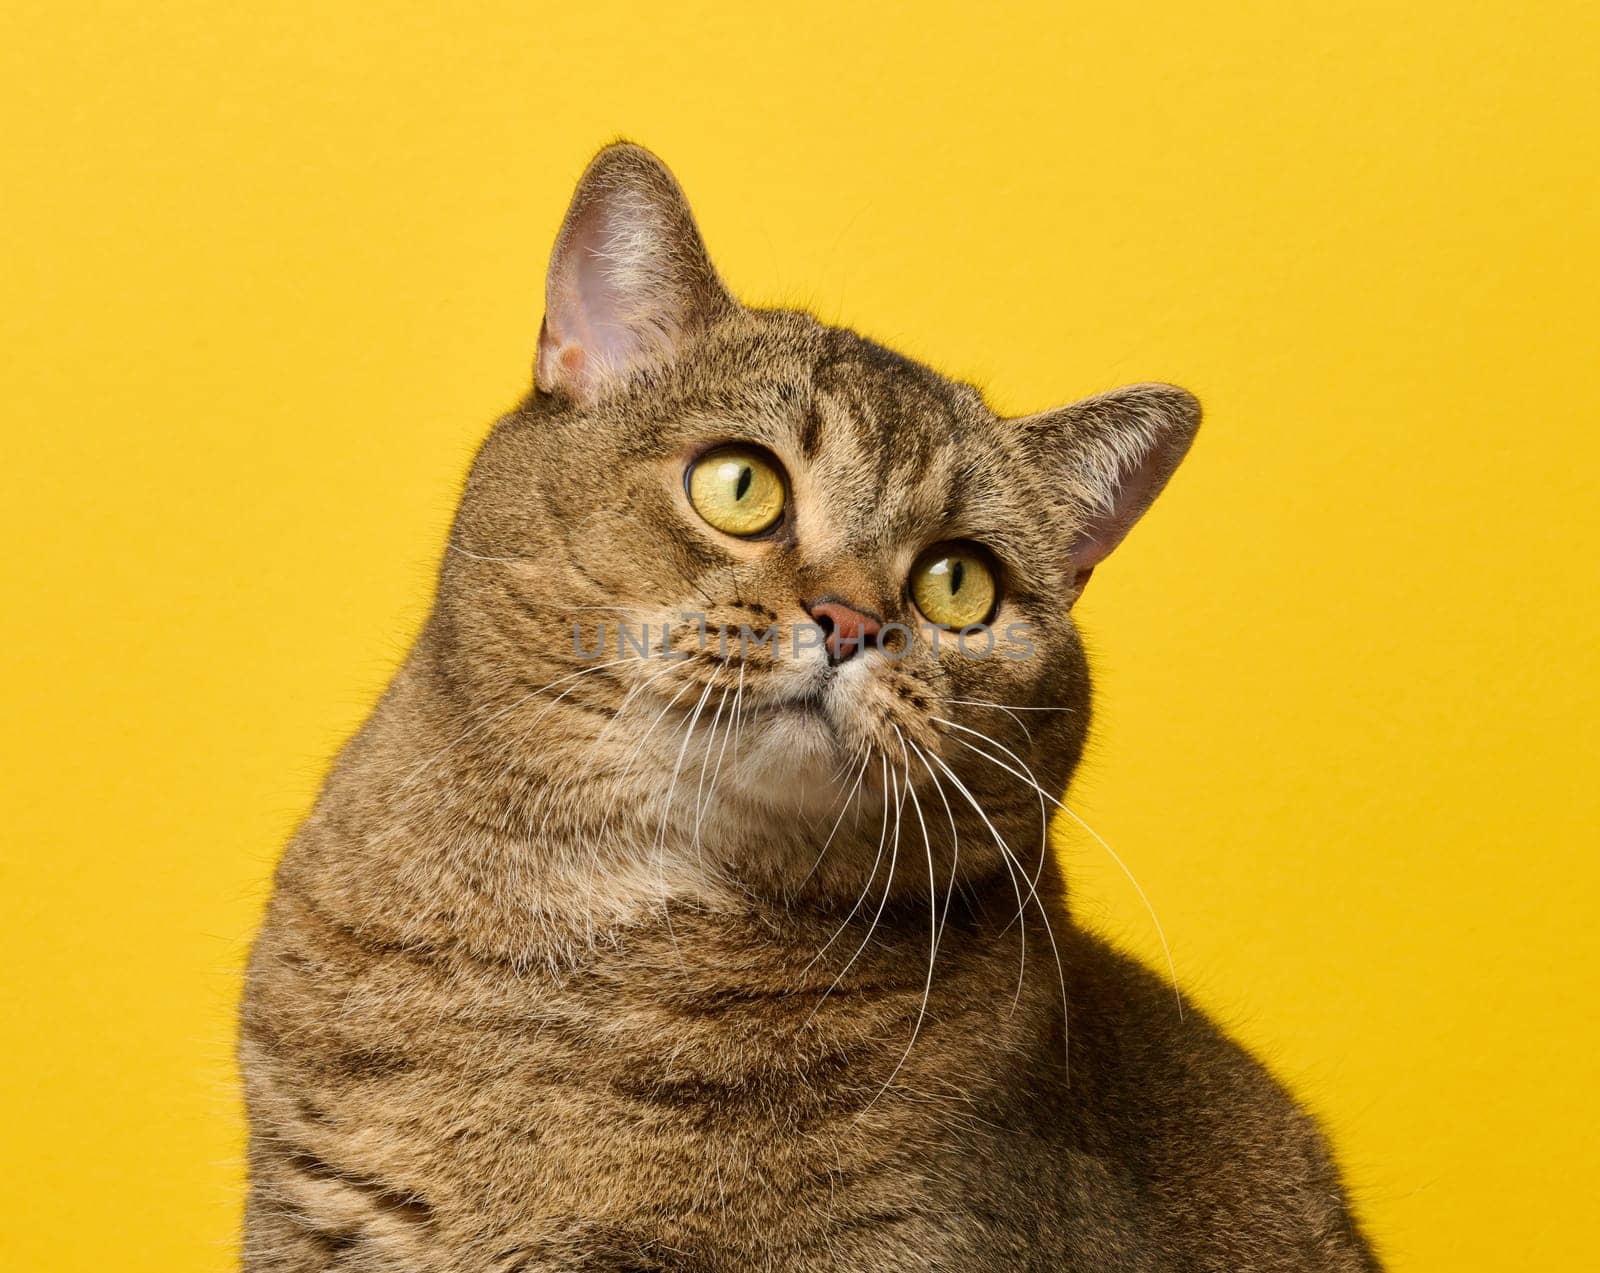 A cute adult straight-eared Scottish breed gray cat sits on a yellow background